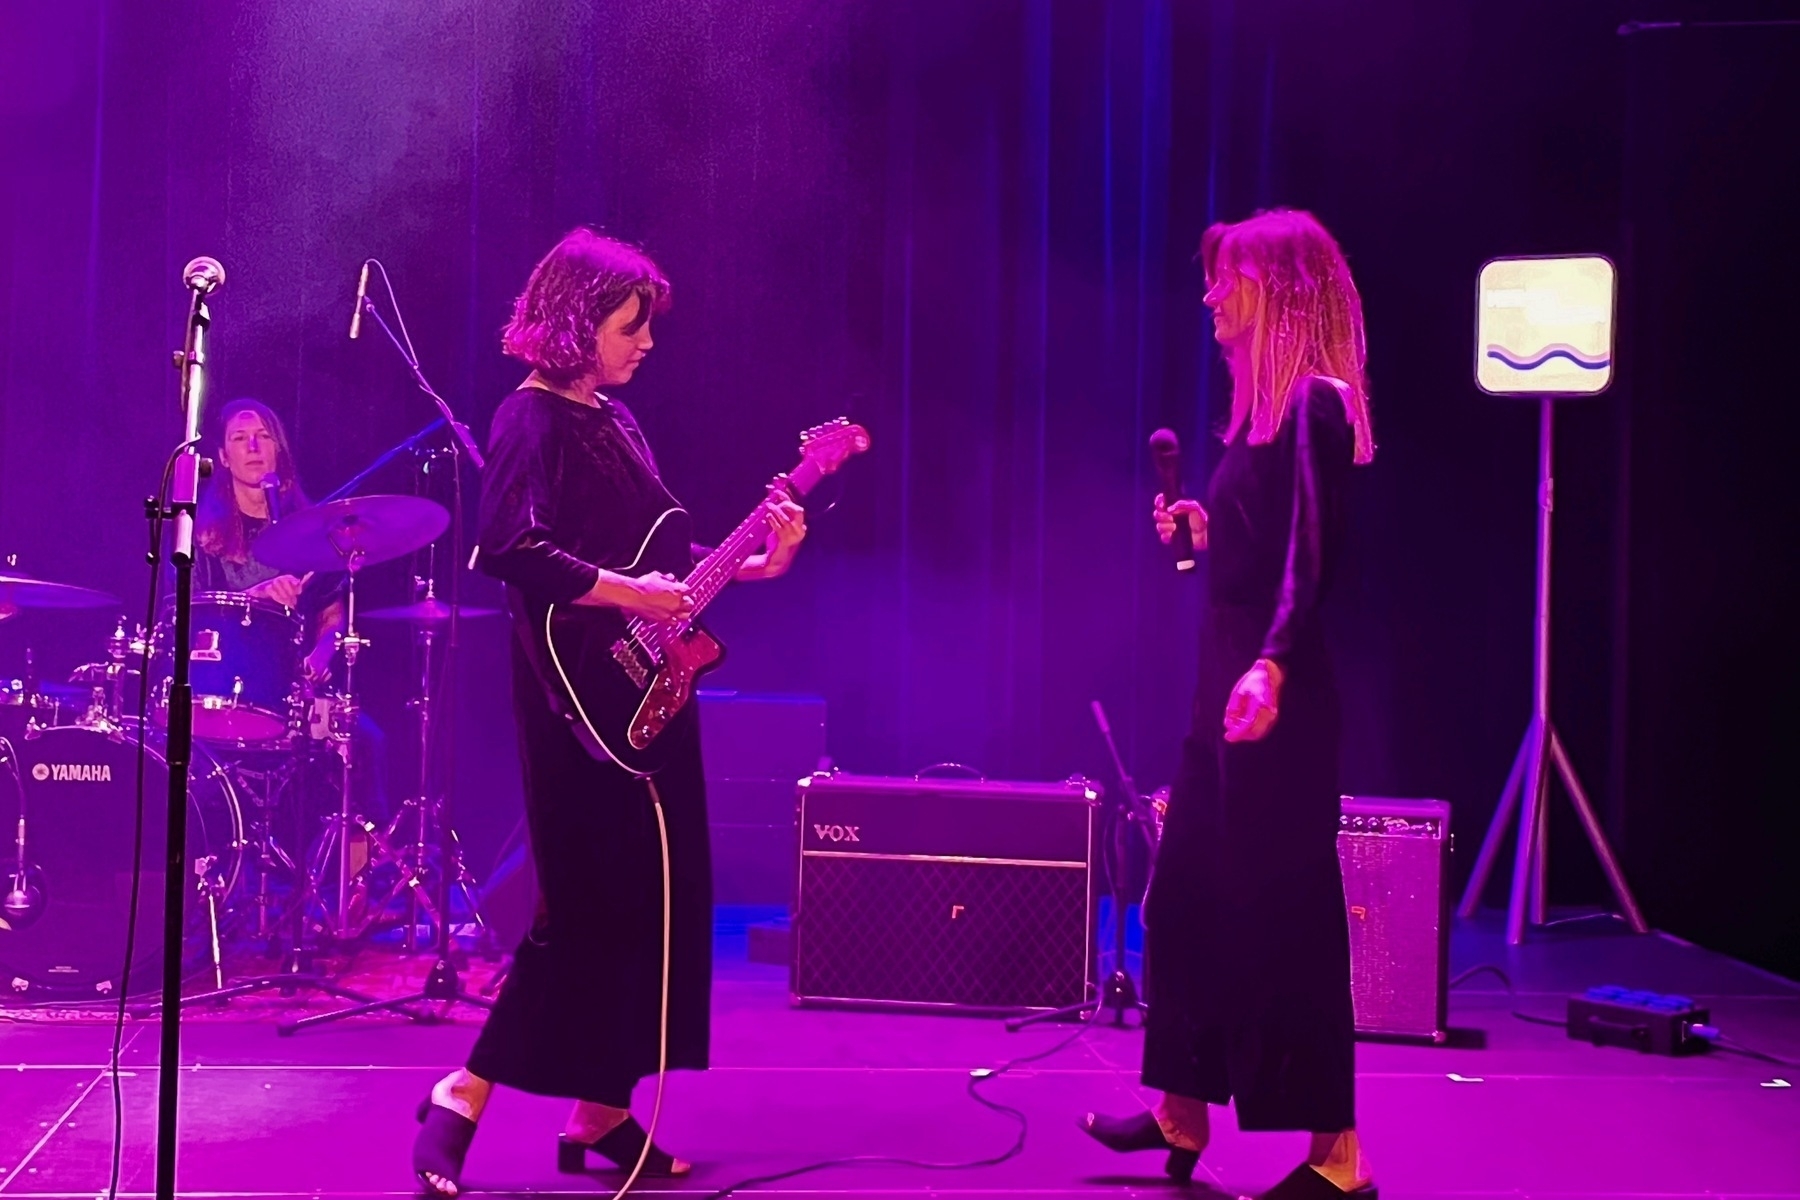 Guitarist and singer facing each other, both wearing the same velveteen onesie. In the background the drummer is seen and the lighting is violet.